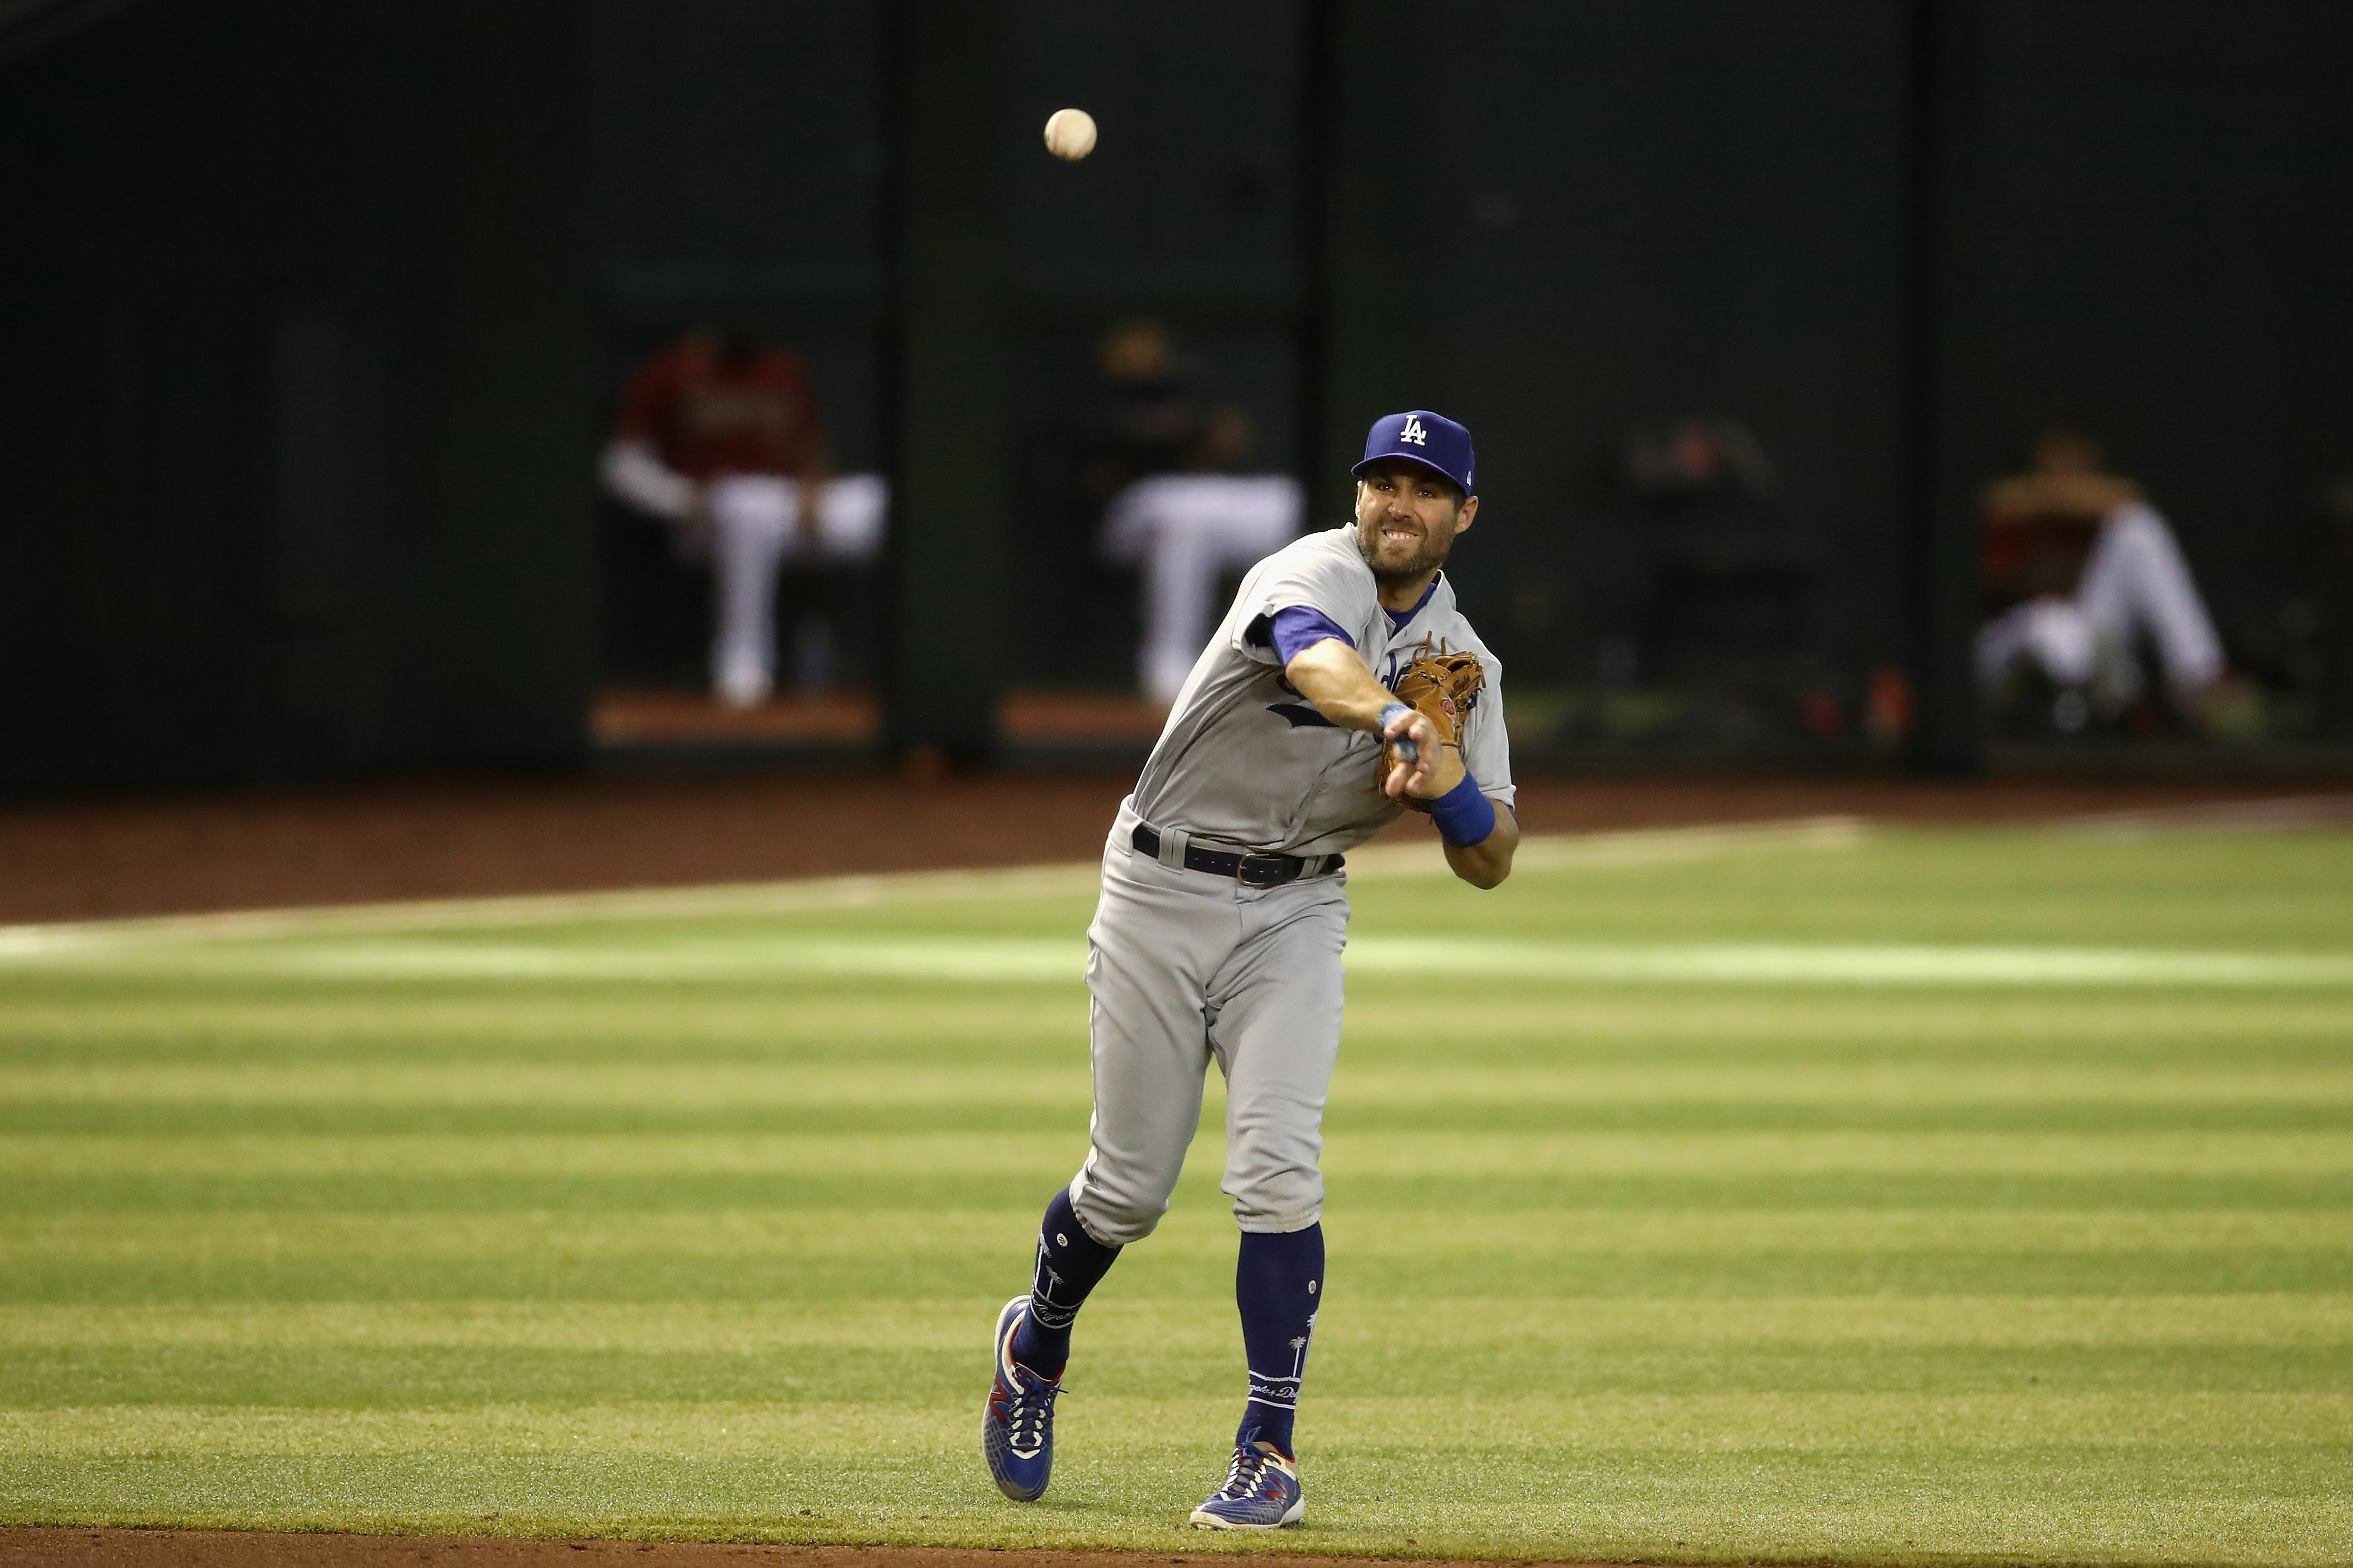 Chris Taylor of the Los Angeles Dodgers fields a ground ball. (Christian Petersen/Getty)